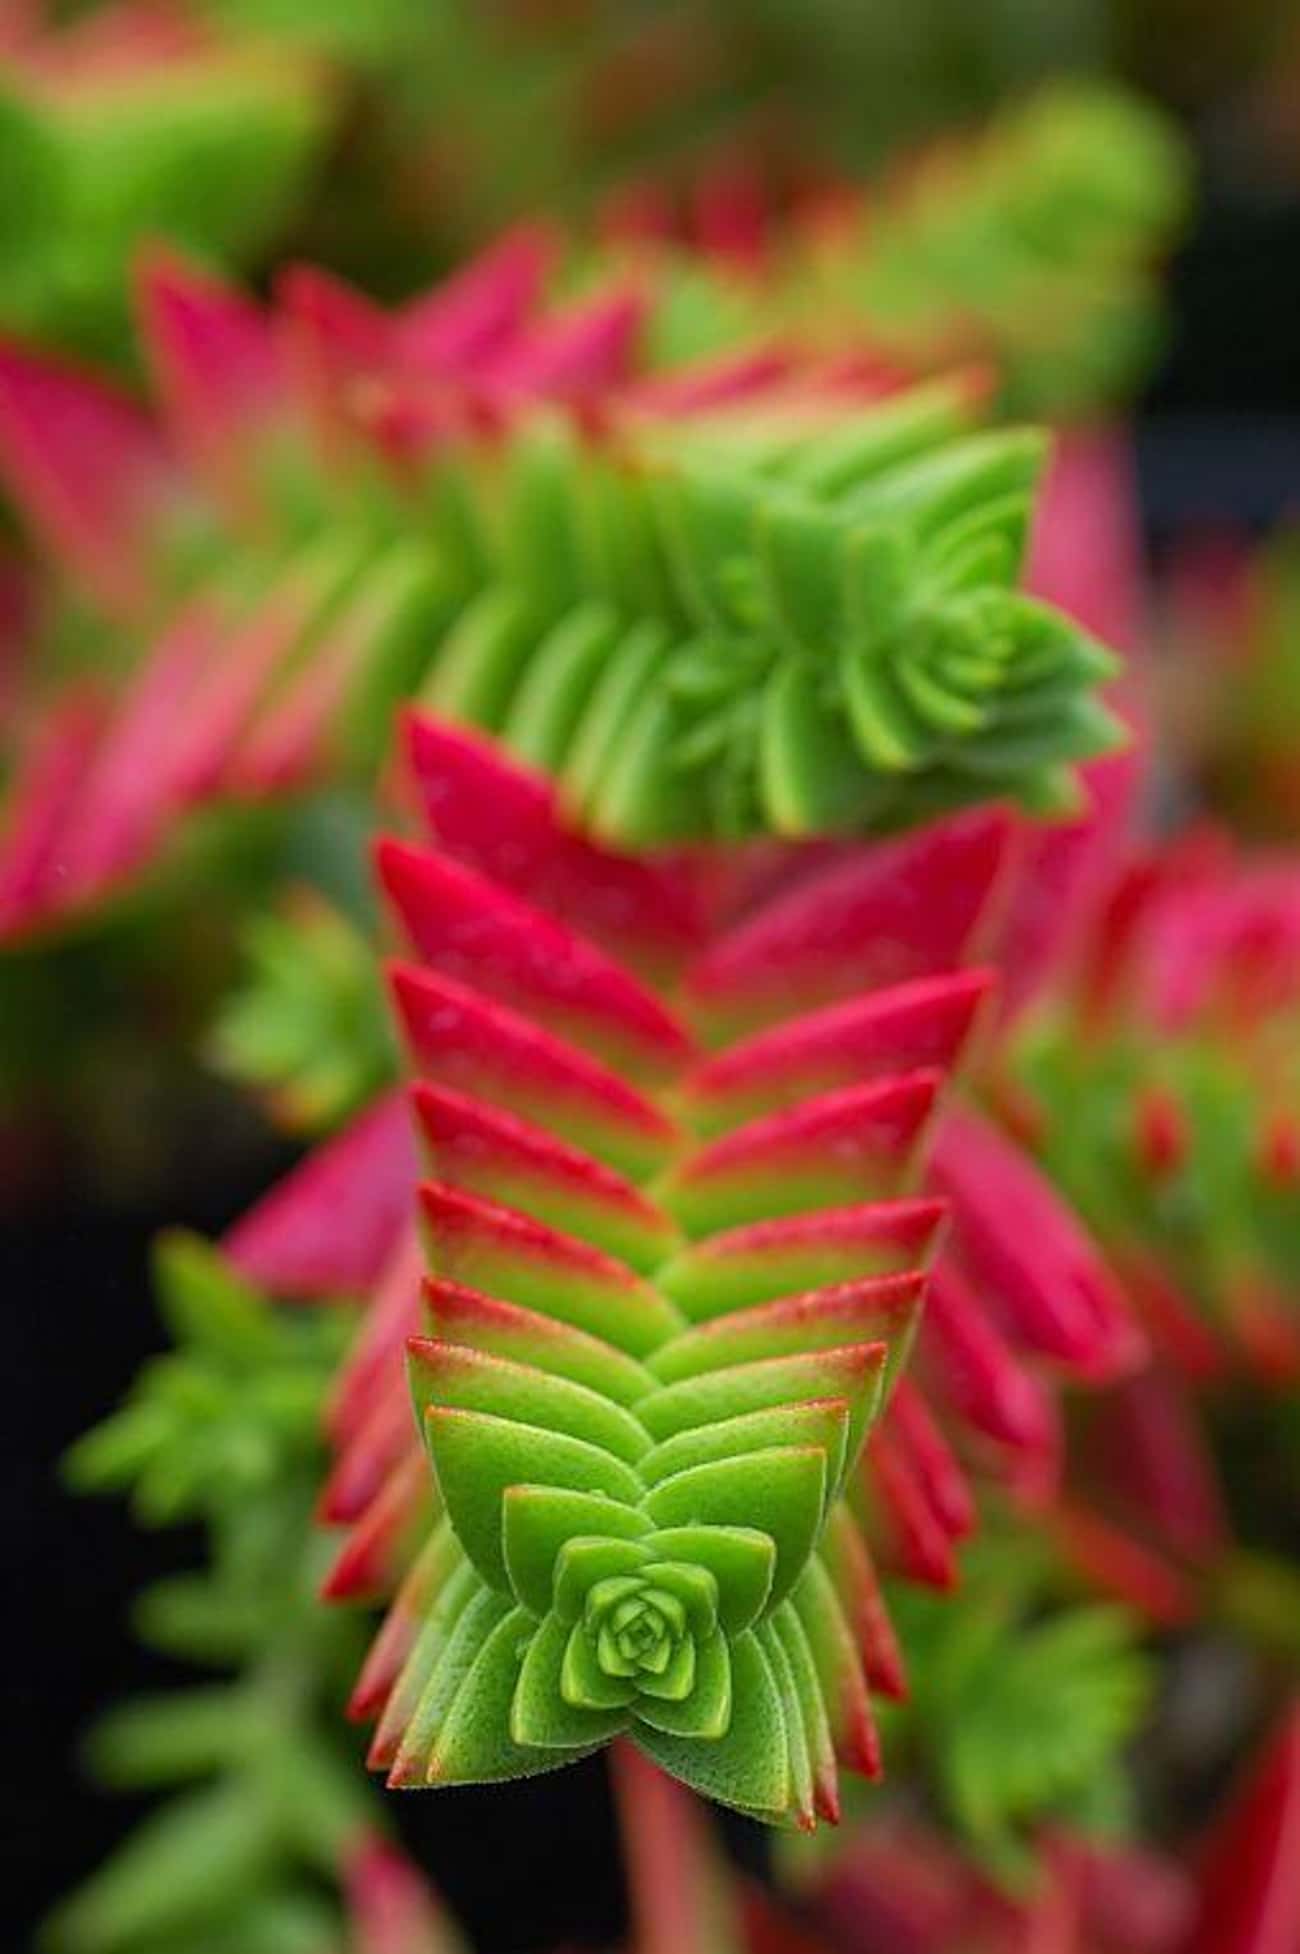 The Crassula Capitella Is One Cool Little Fractal Patterned Cactus